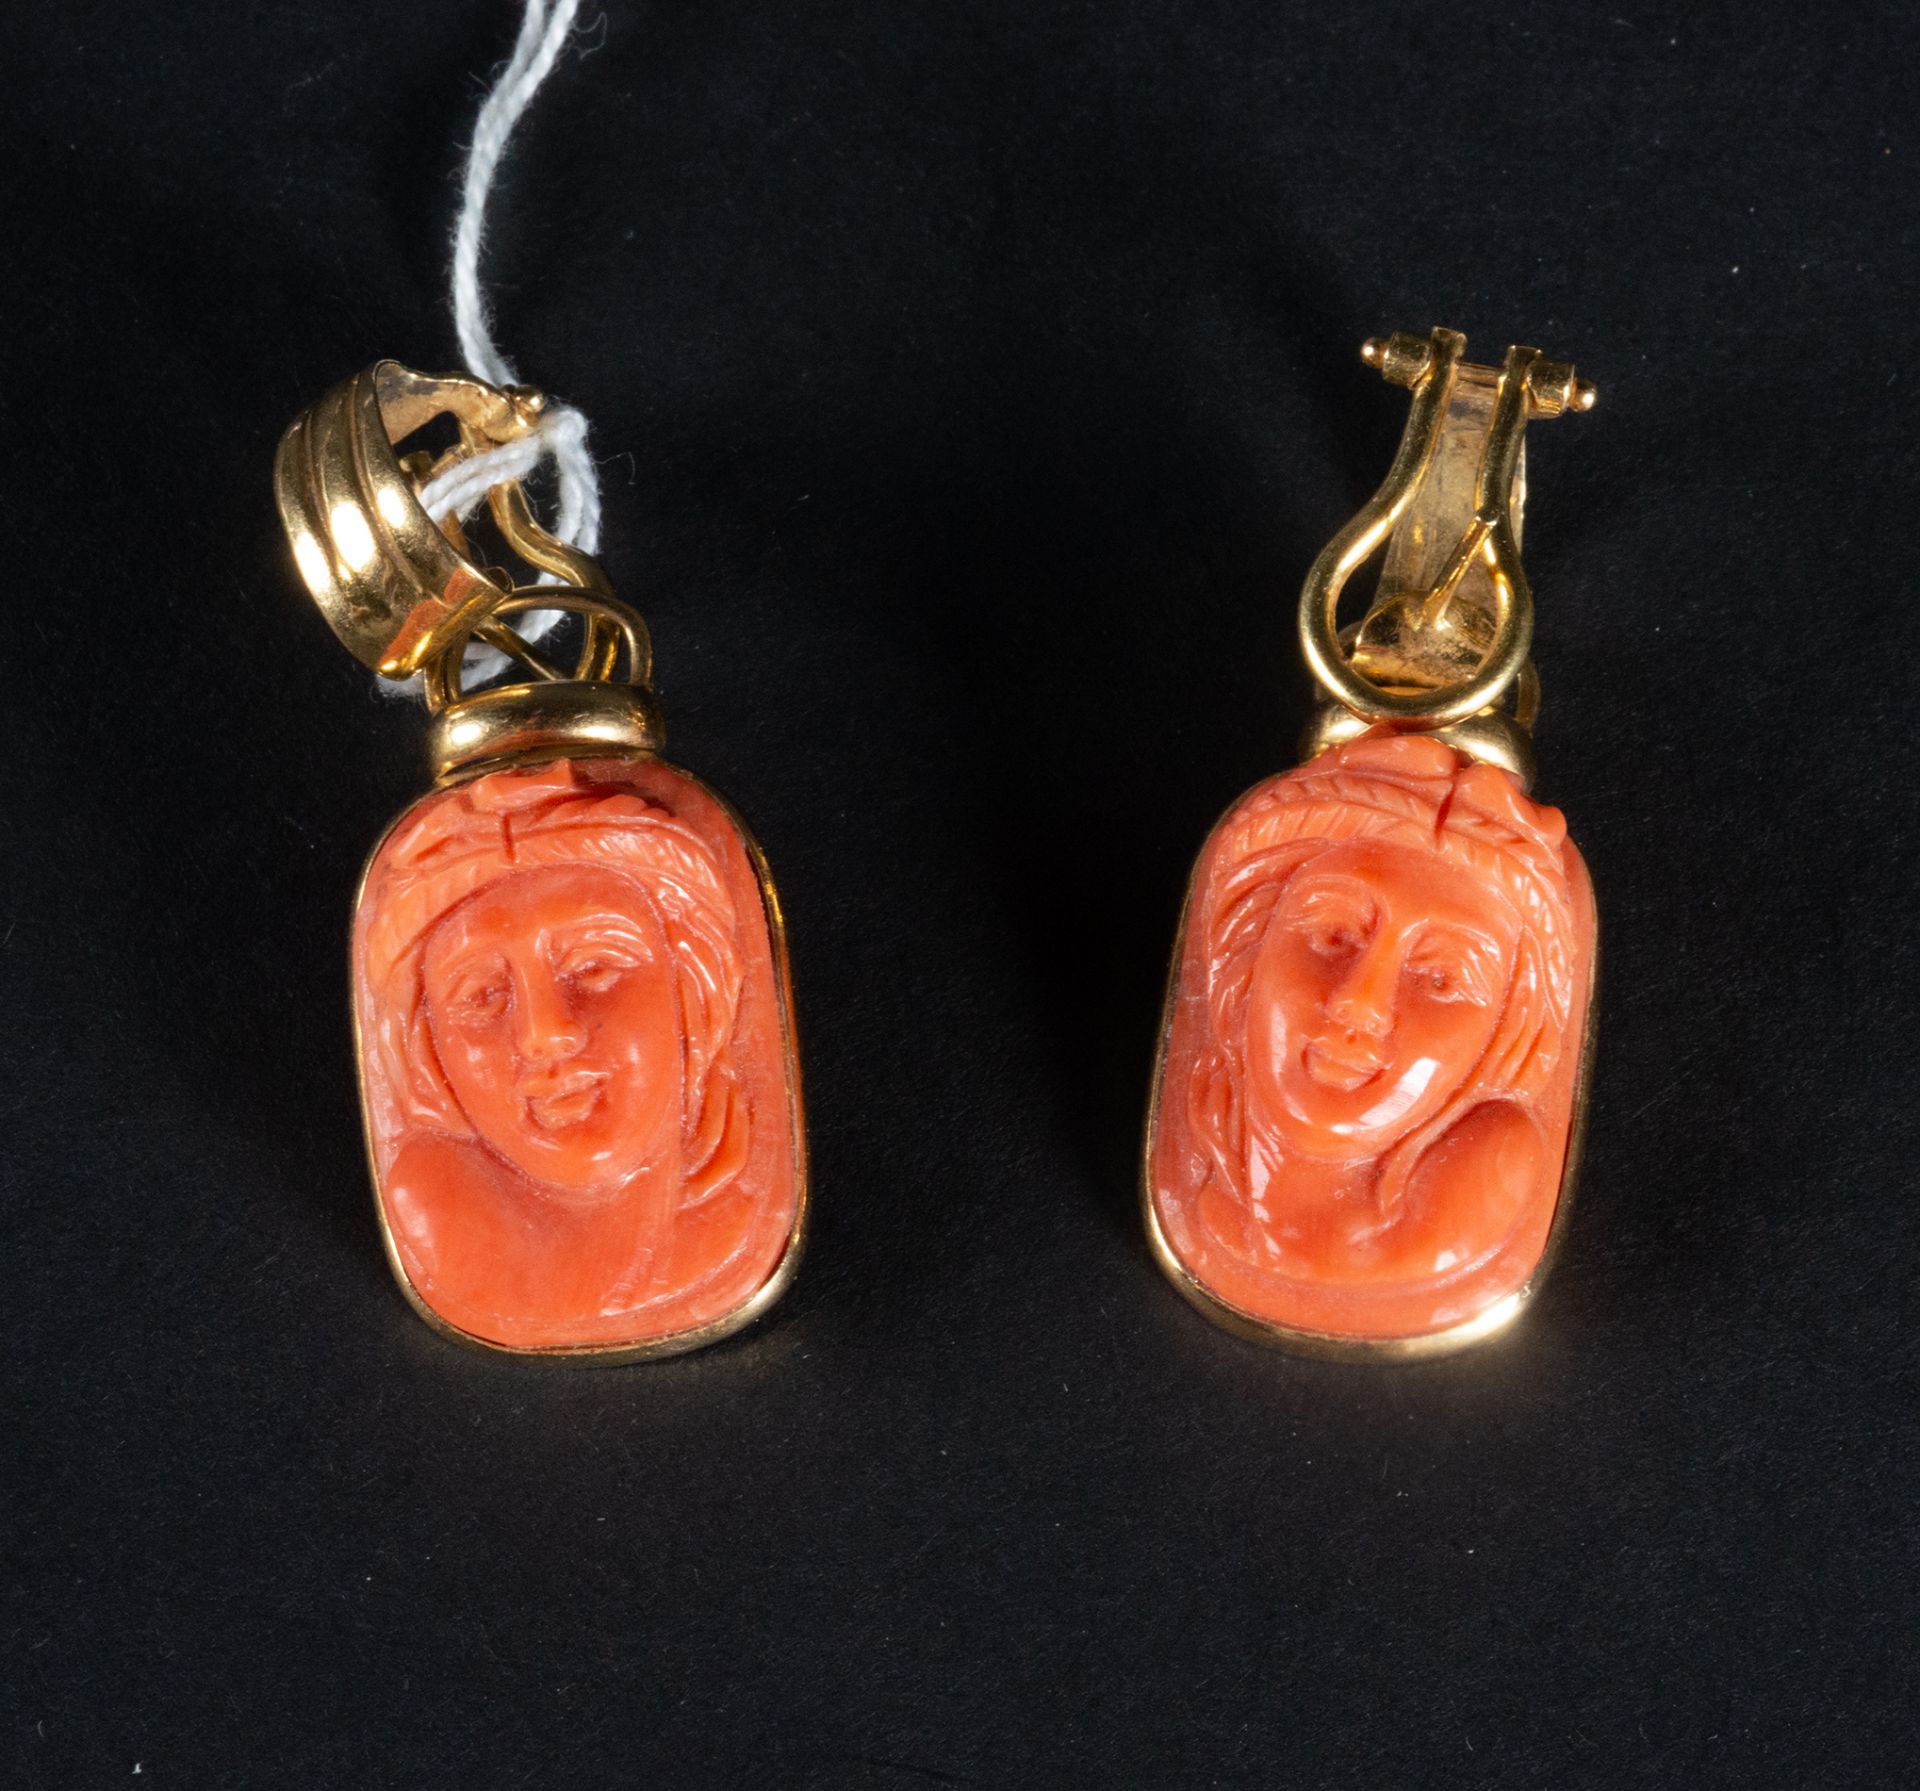 Pair of earrings with an important pair of cameos in red coral representing caryatids